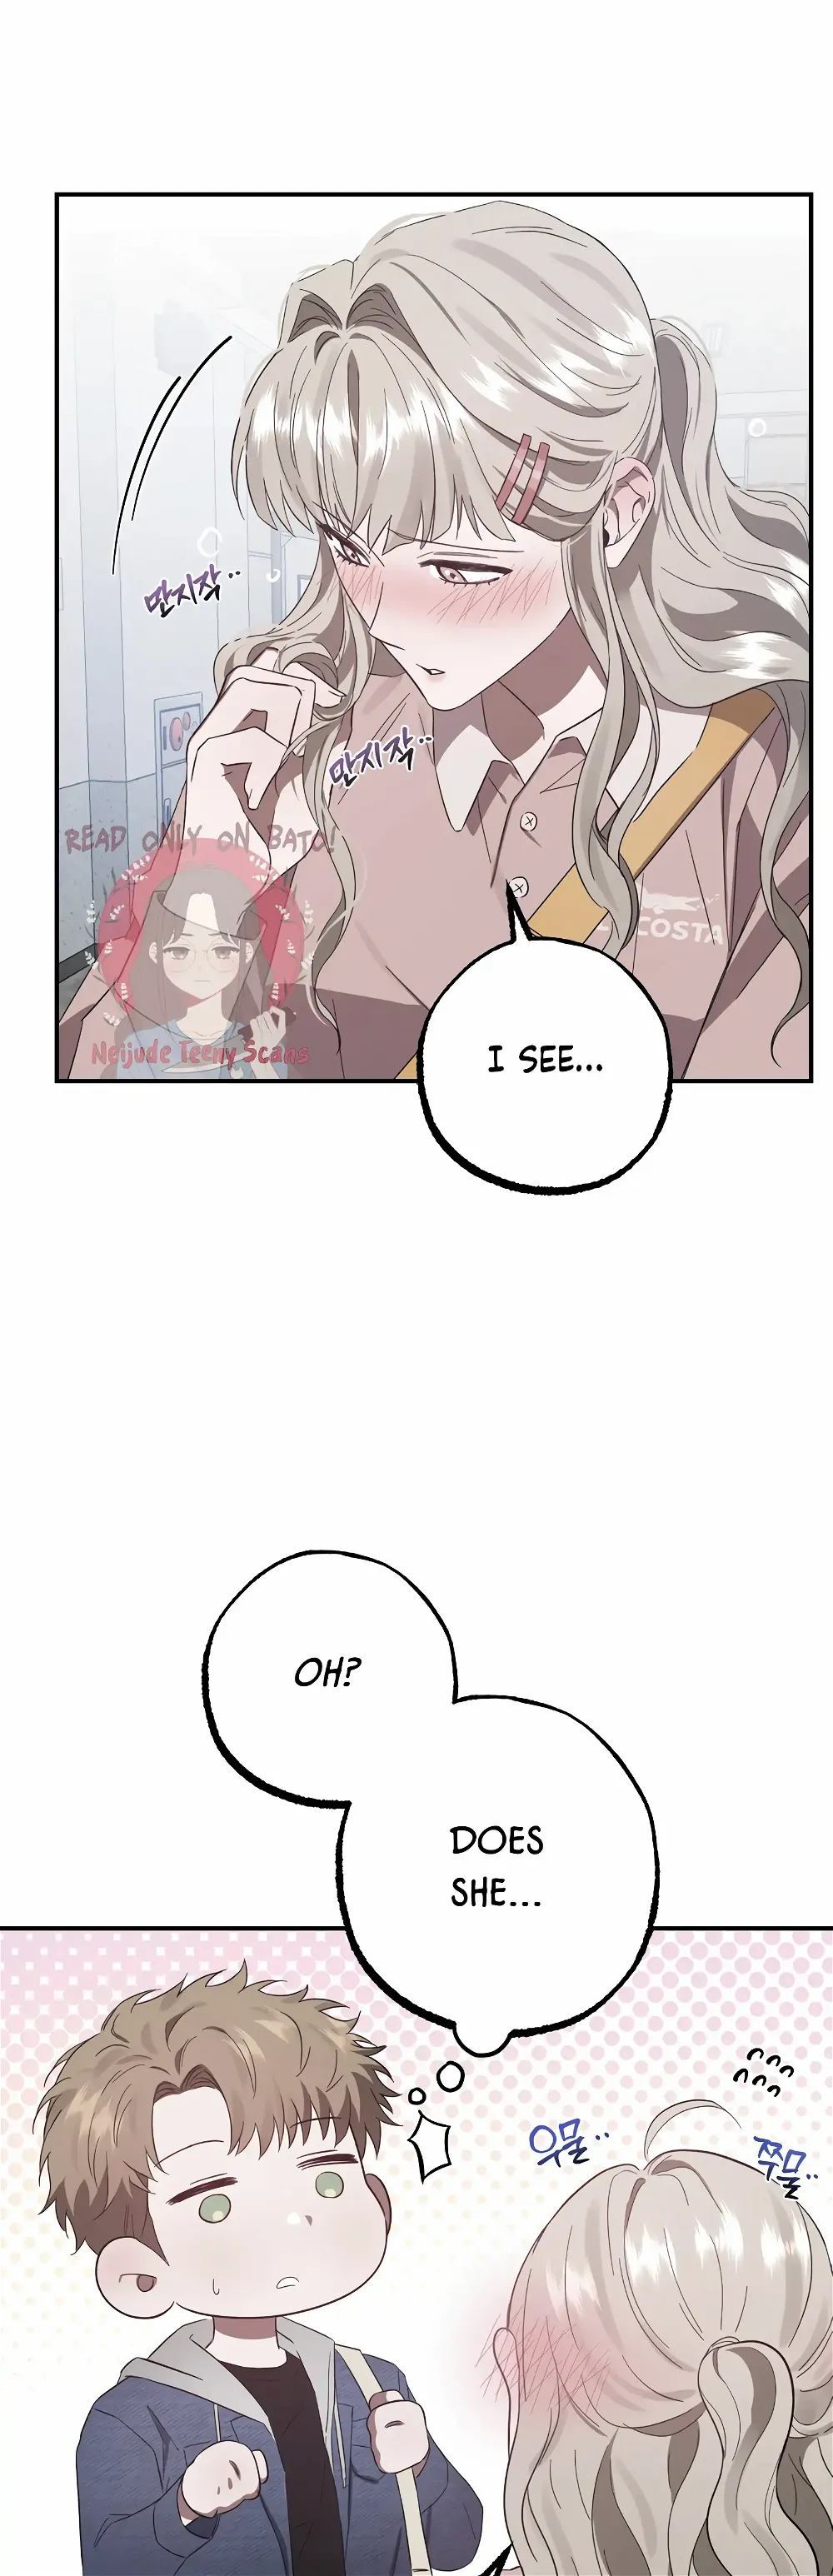 Mijeong’s Relationships chapter 14 - Page 30